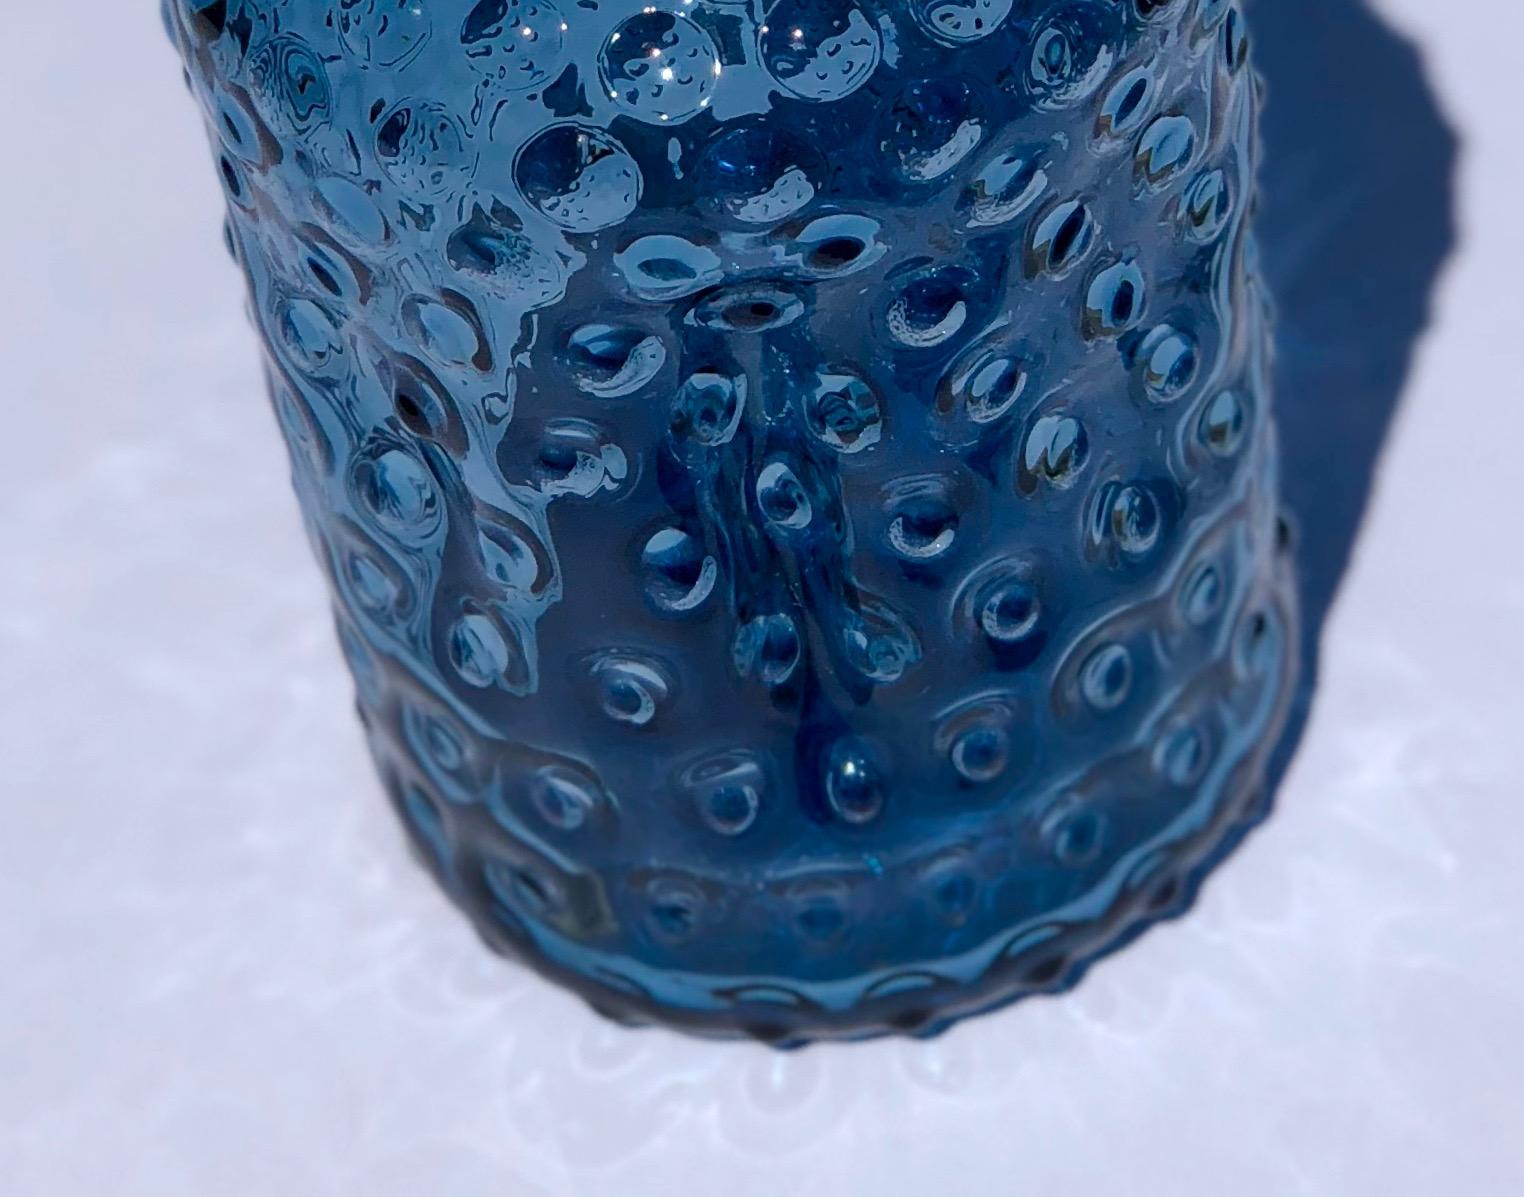 Contemporary Czech Studio Glass Bottle or Vase In Good Condition For Sale In Vienna, Austria